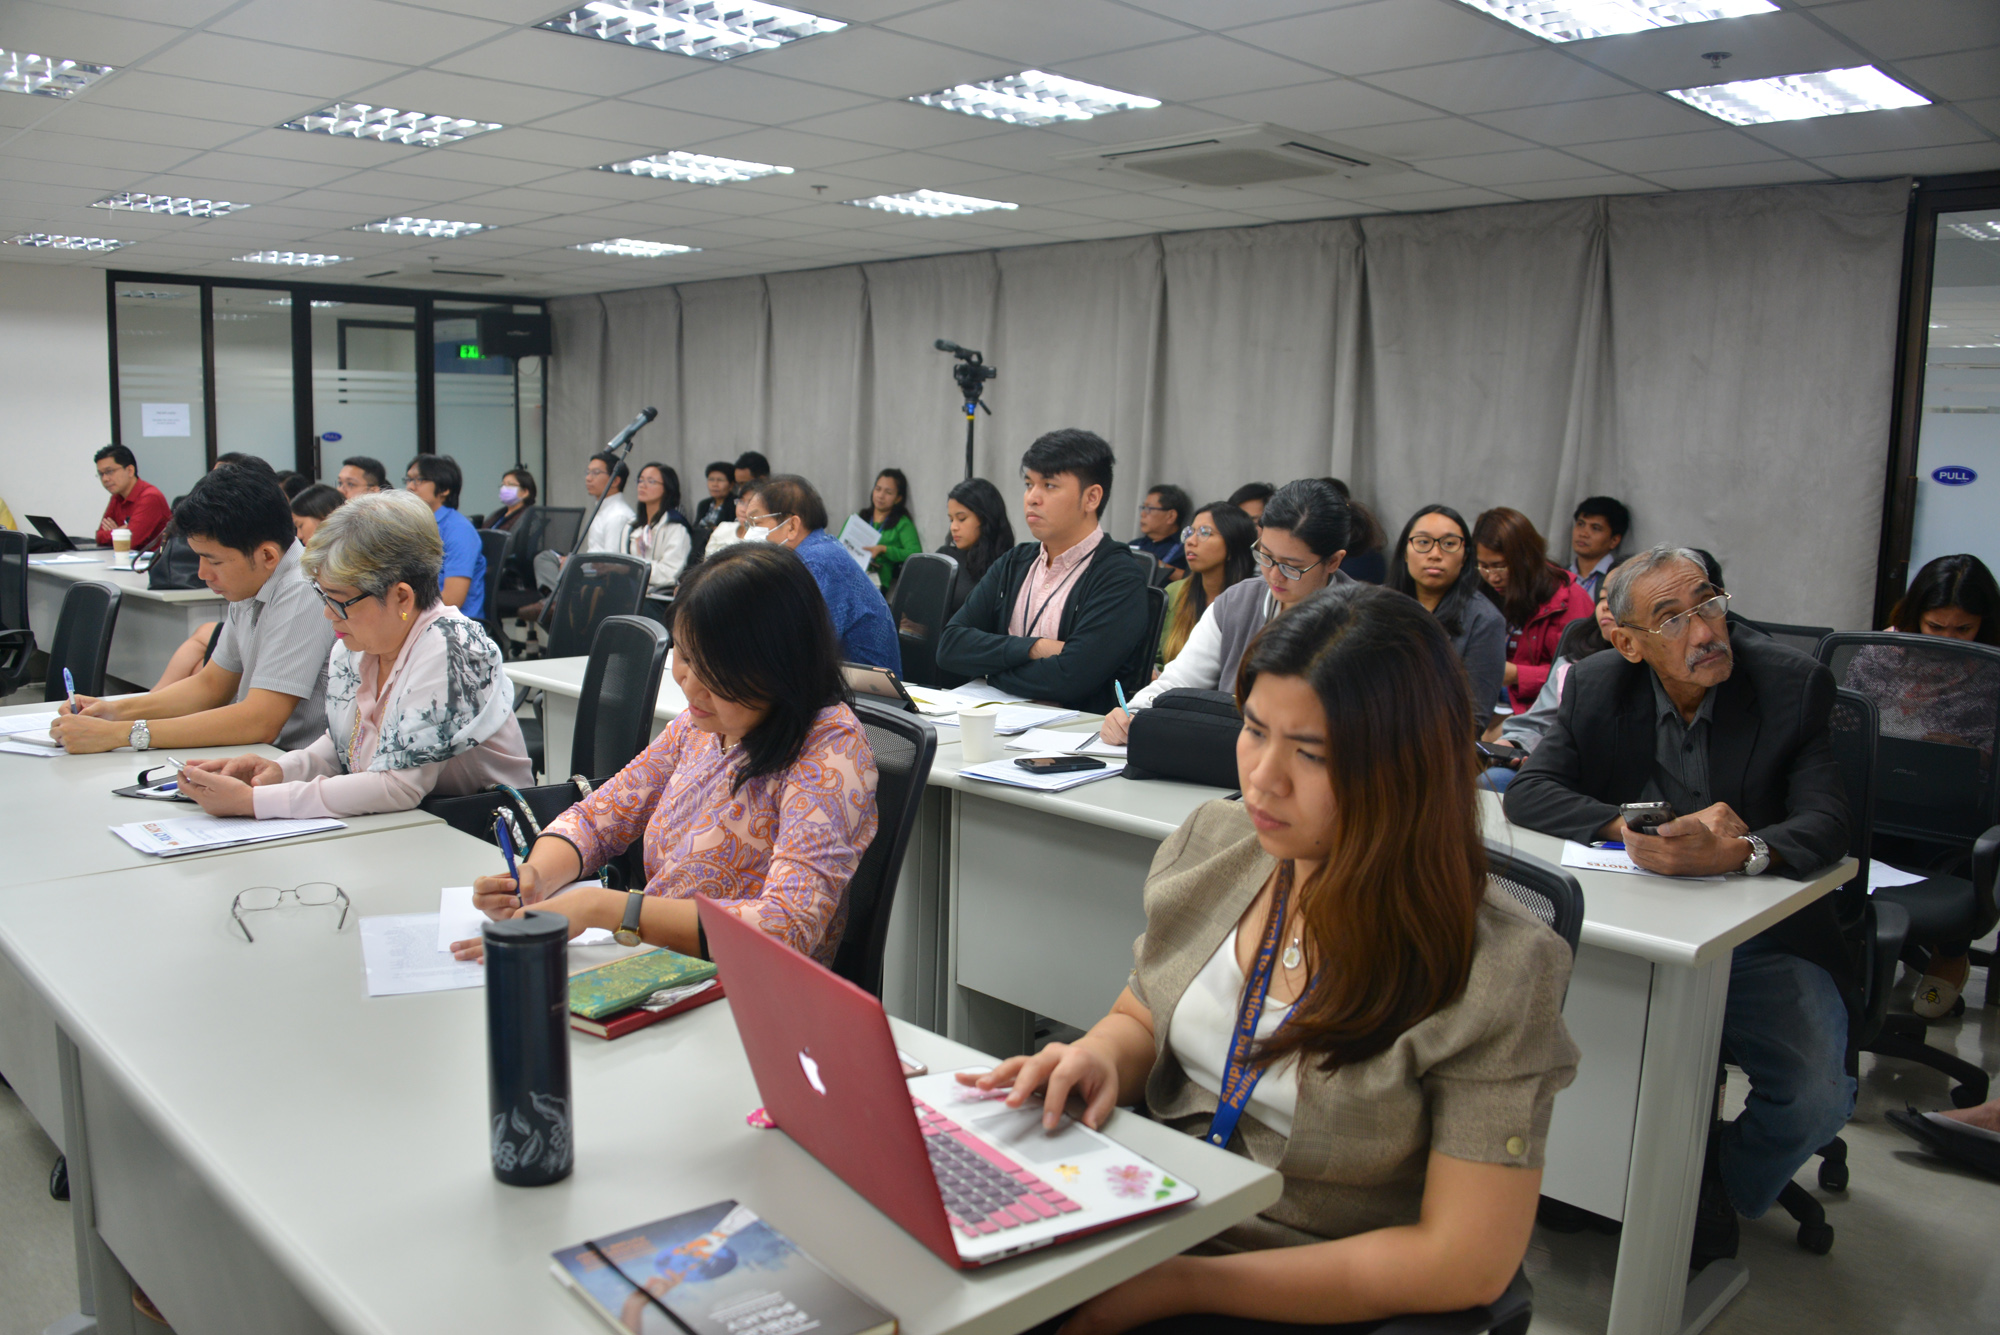 Public Seminar on Global Trade and SMEs-pids-tradesmes-5-20191016.jpg